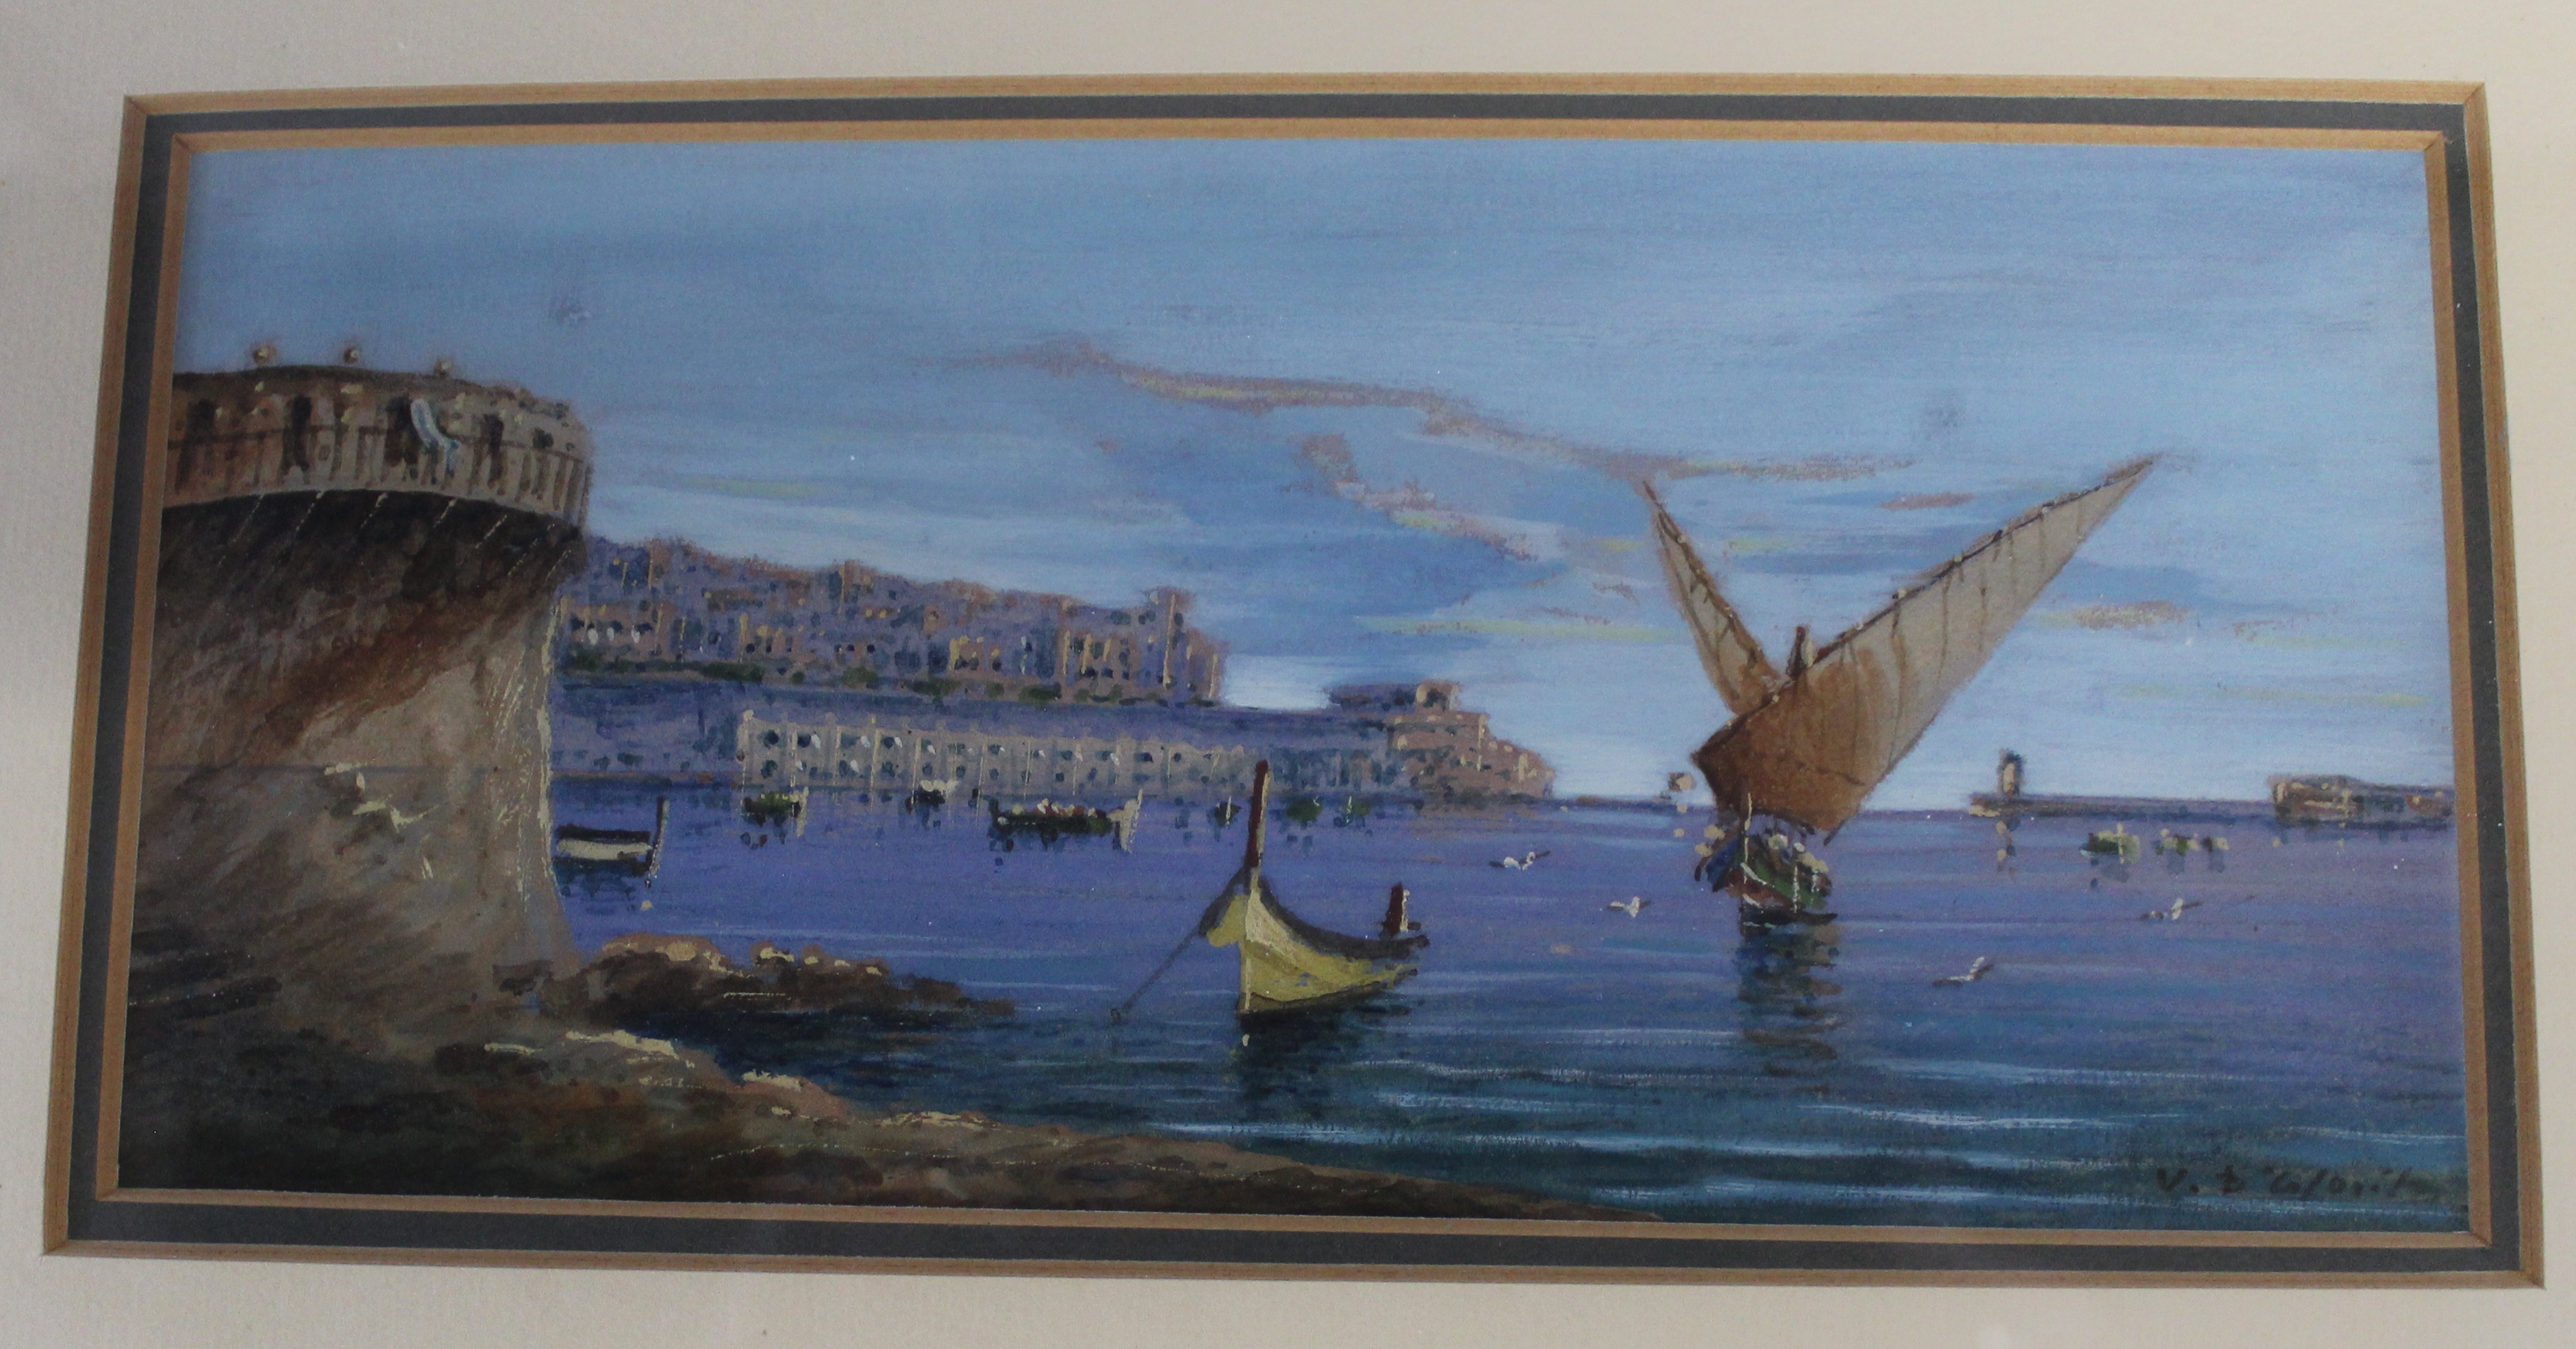 Set of four framed gouache paintings depicting Valetta Harbour by Vincenzo D'Esposito (Maltese - Image 7 of 7